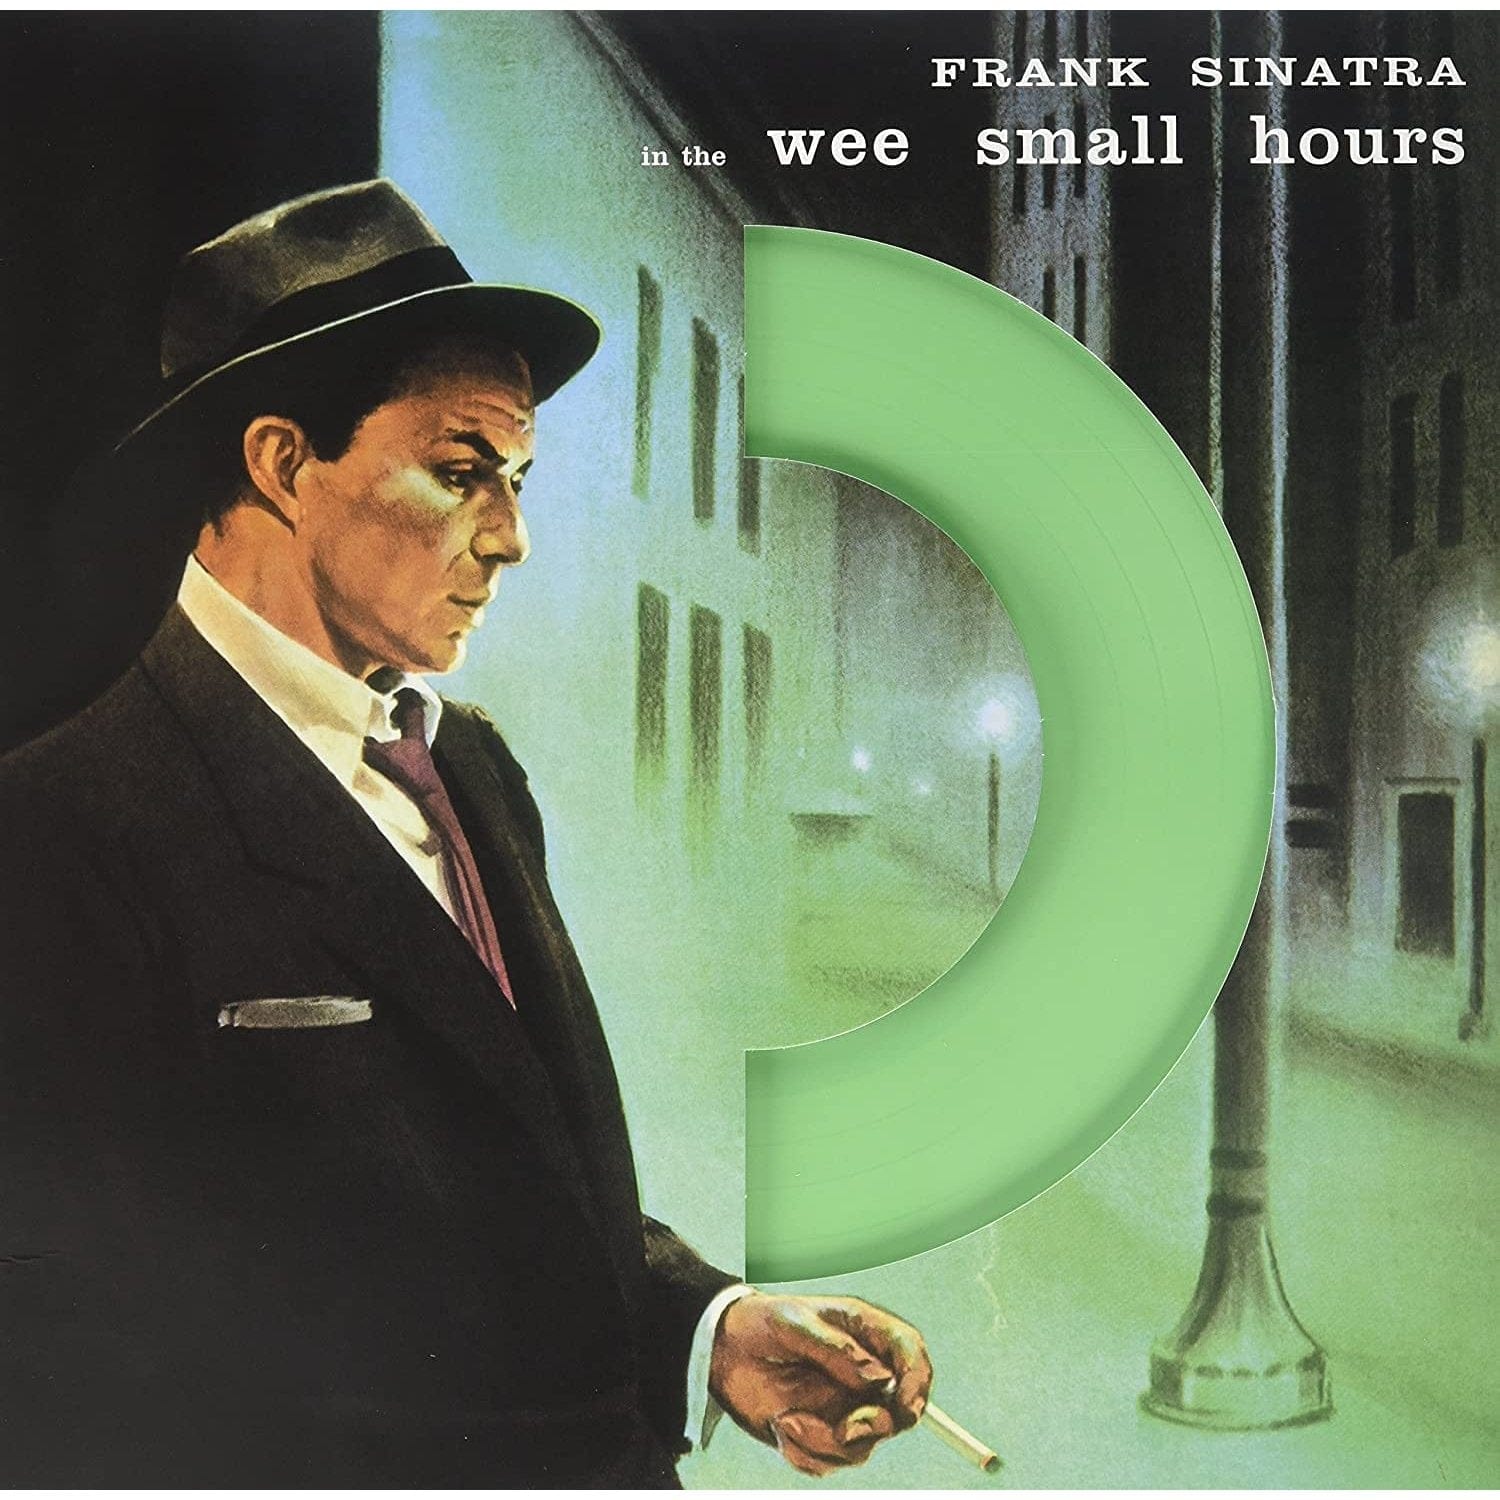 FRANK SINATRA - IN THE WEE SMALL HOURS [VINYL]